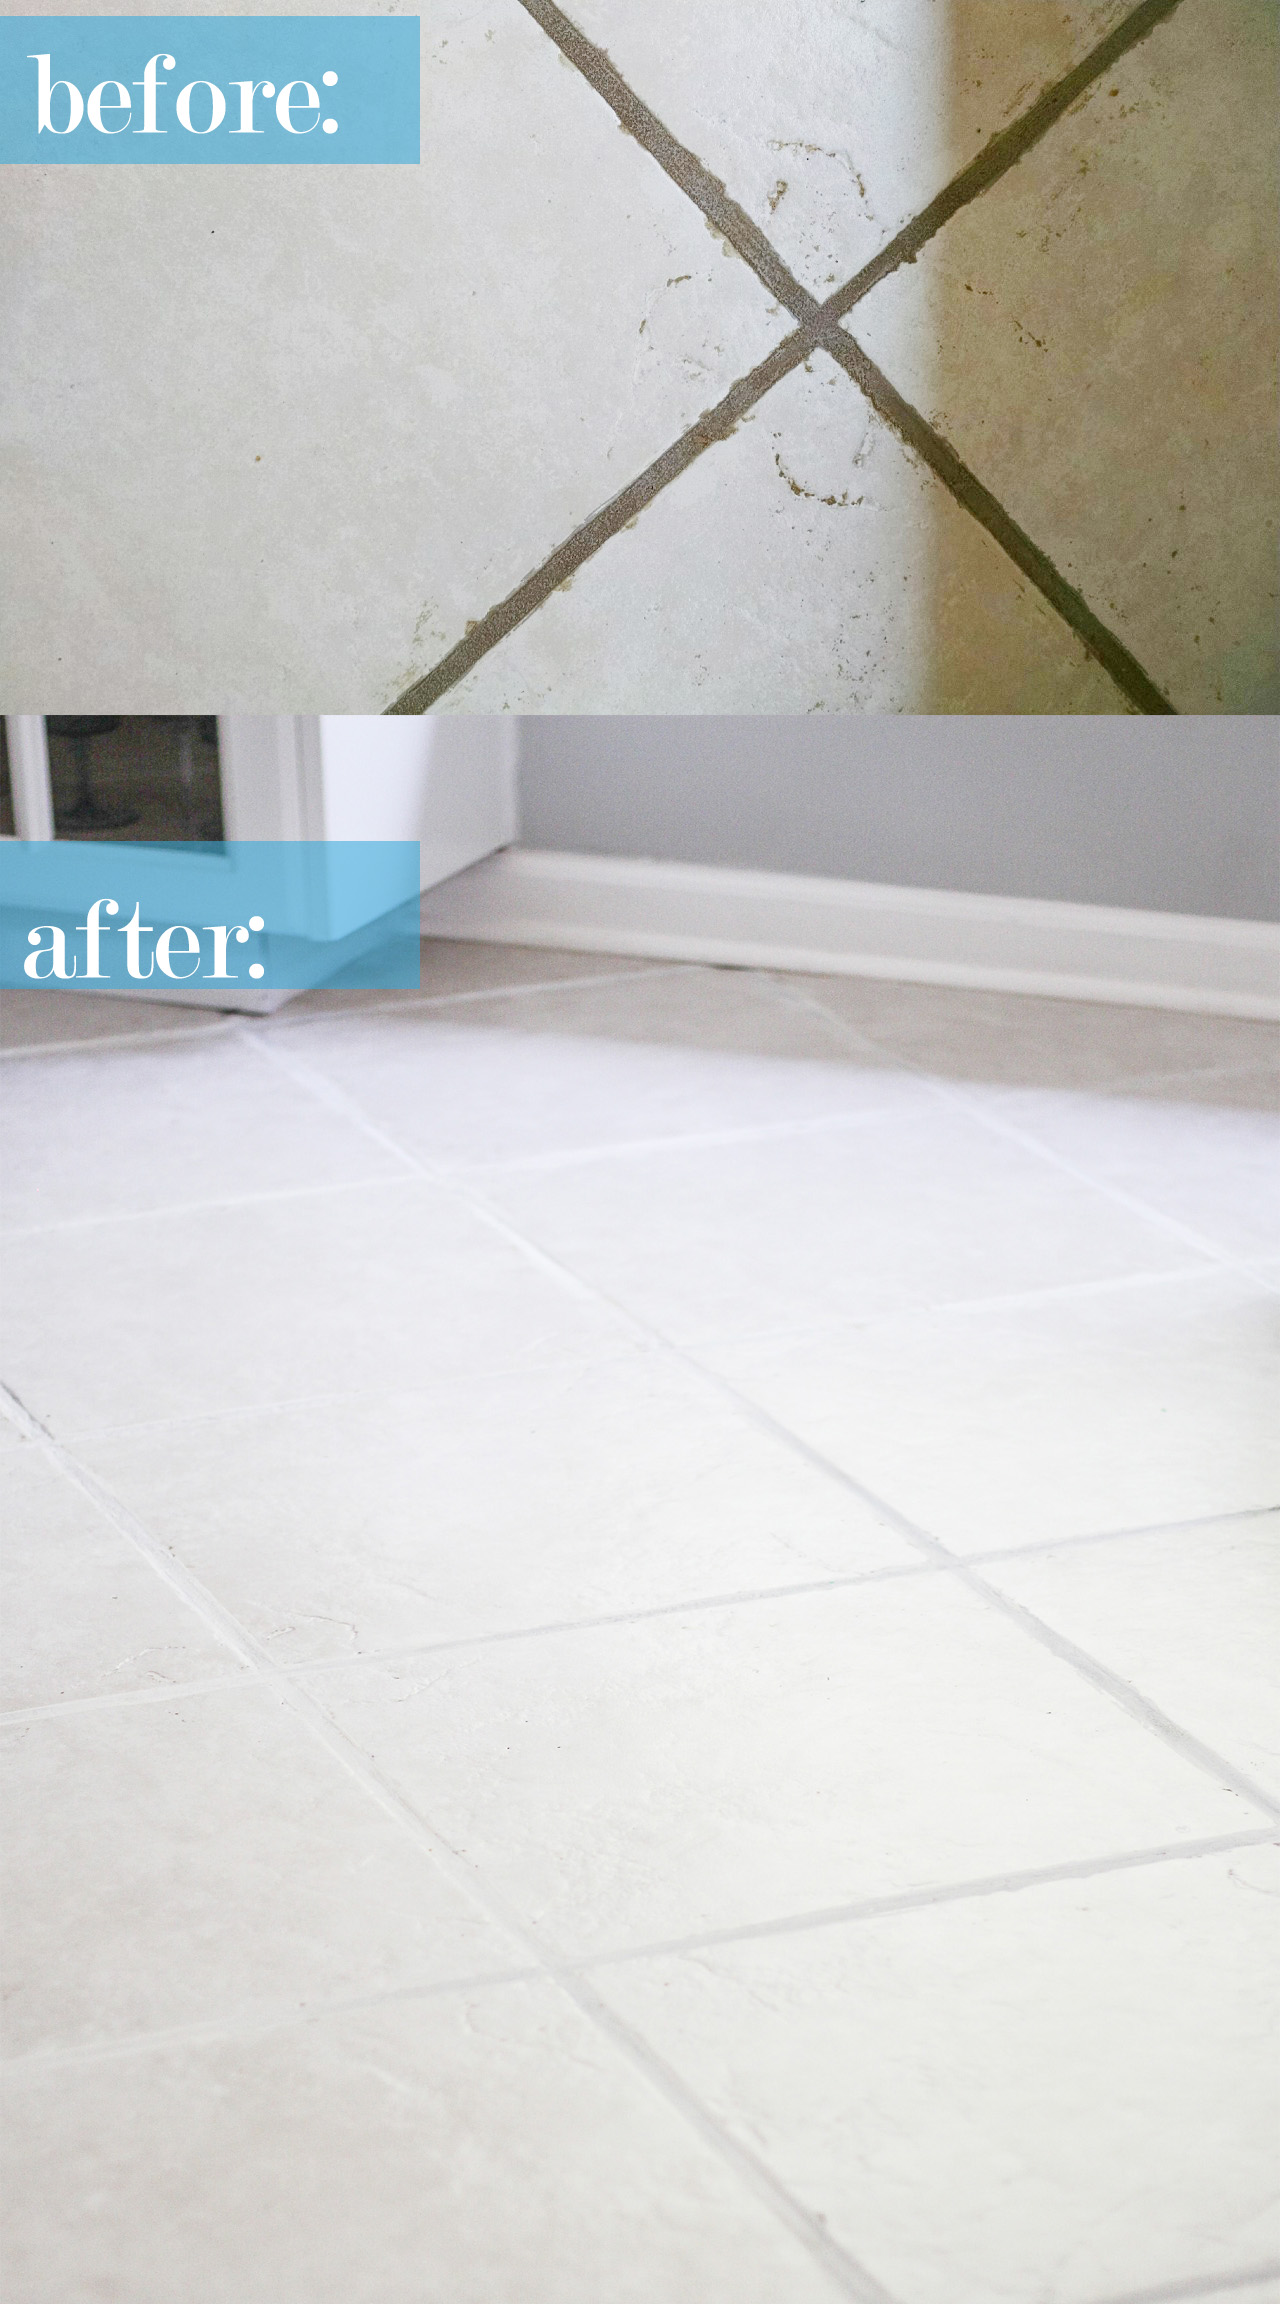 Neglected Tile Flooring, What Is The Best Way To Clean Tile Floors